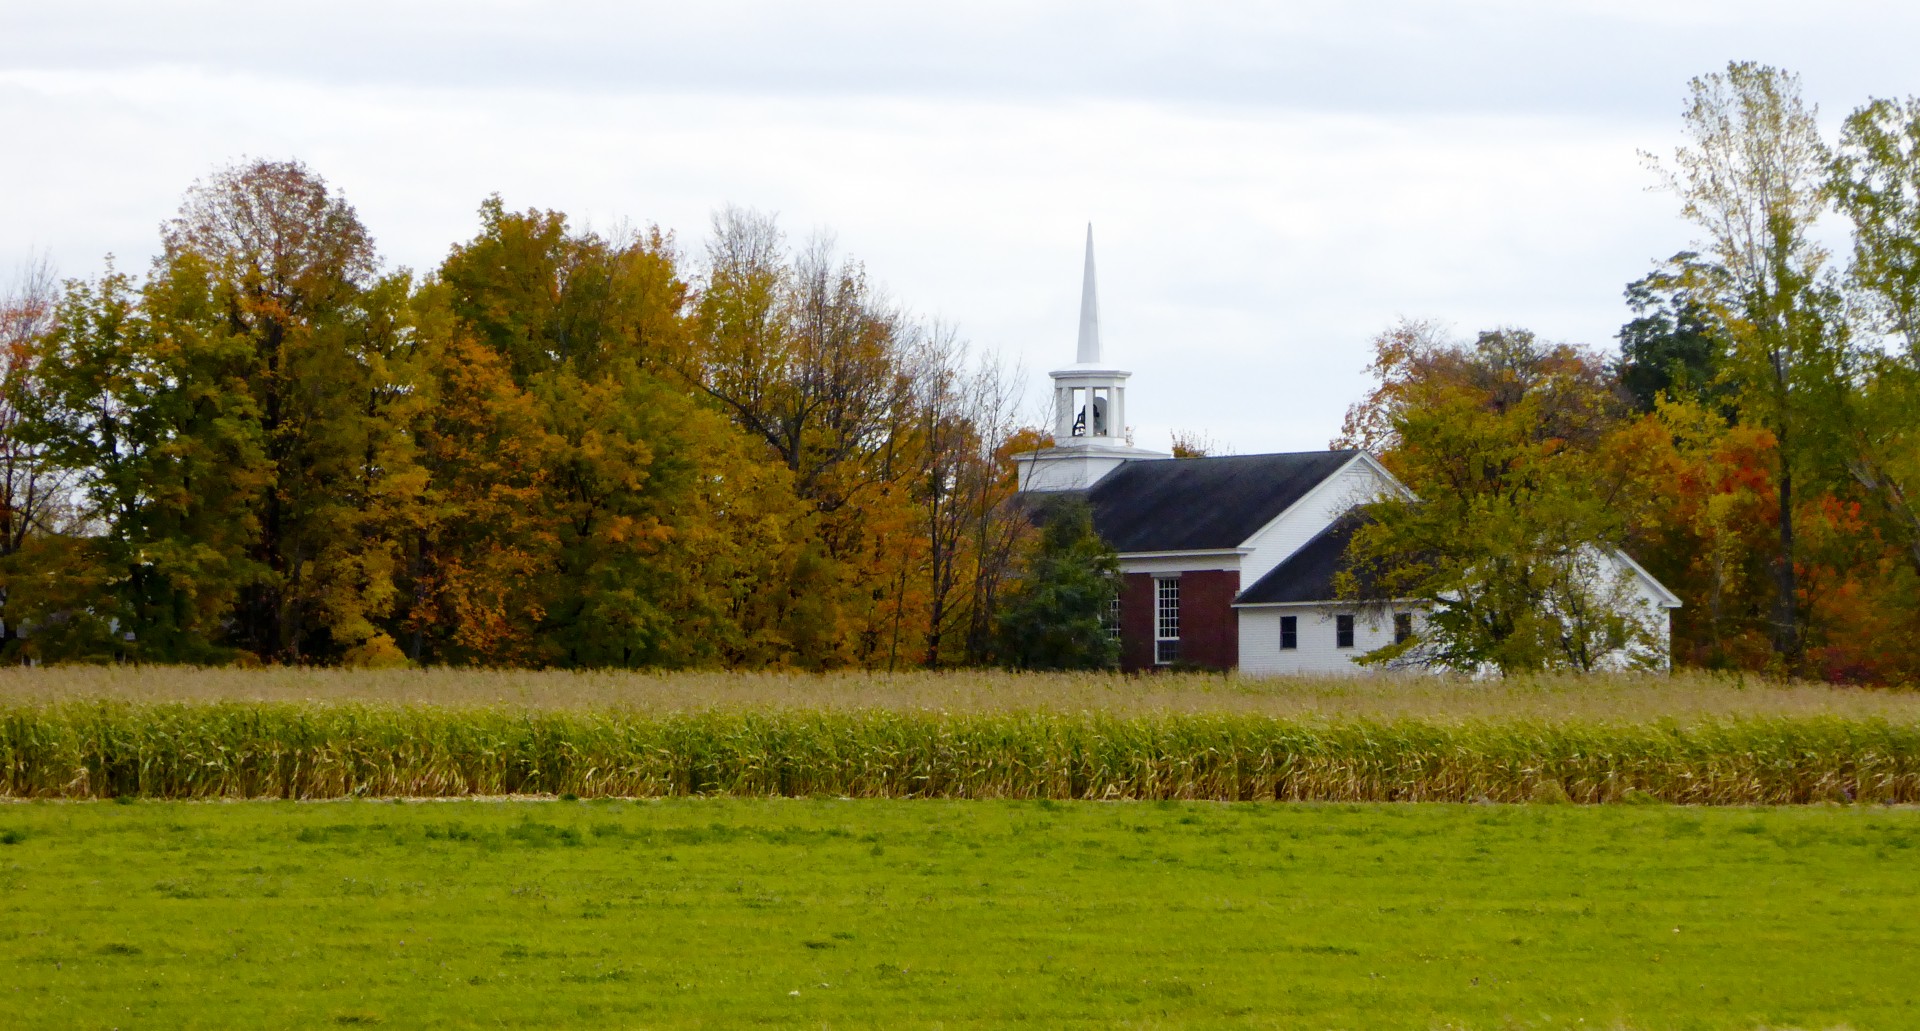 A white steeple church amidst fall foliage is footed with crops of corn and a bright green meadow